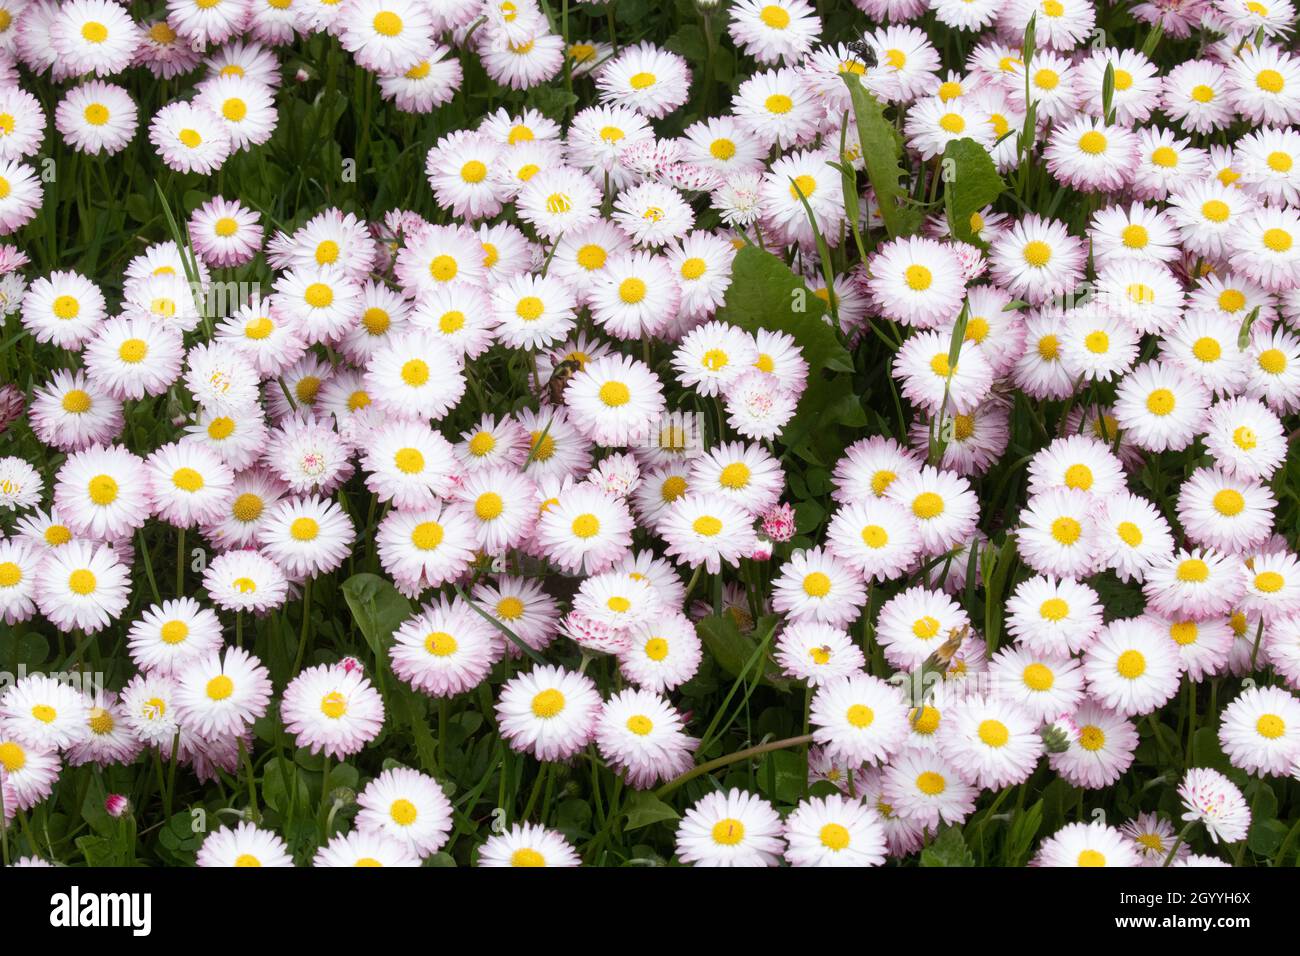 Spring bedding of a flowering English daisy, Bellis perennis in Northern Europe. Stock Photo